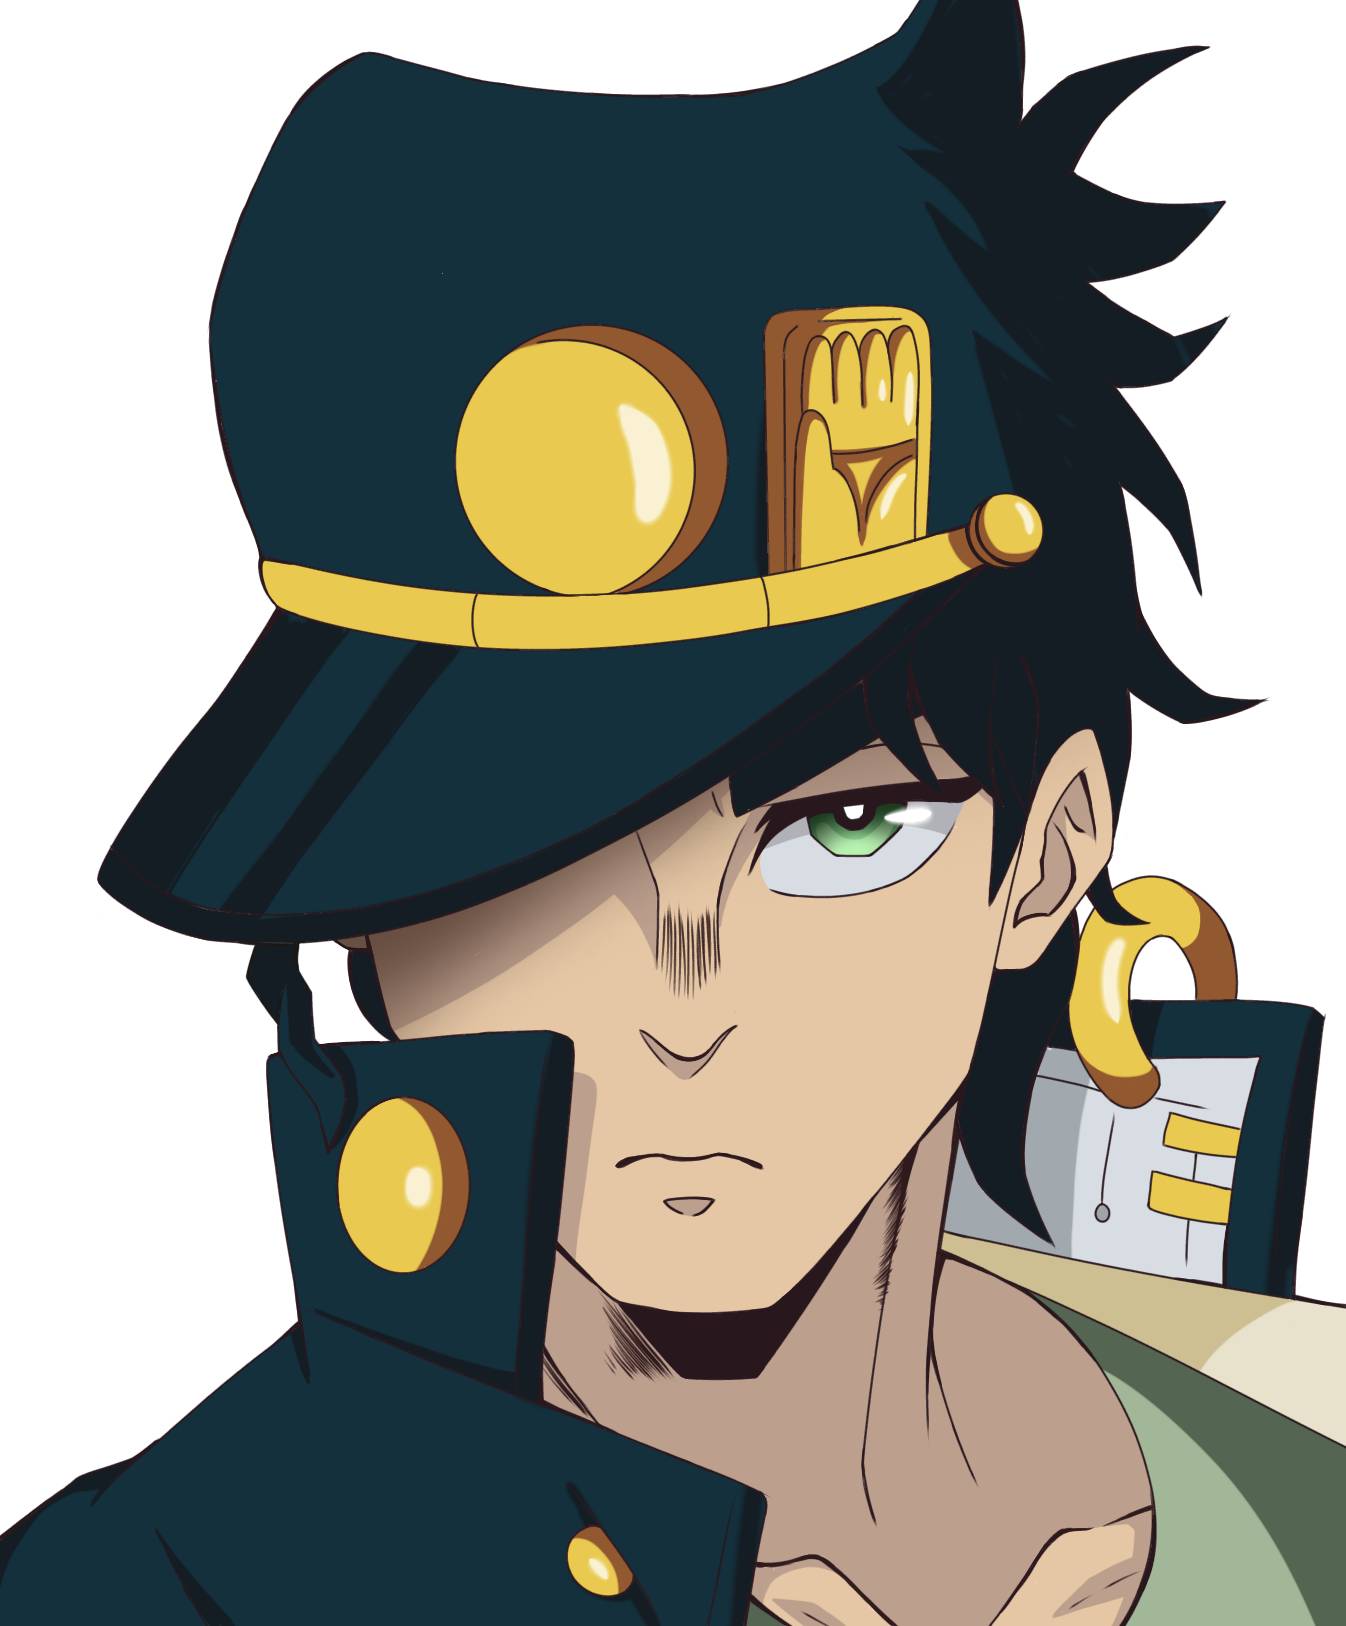 Fanart] Jotaro Kujo in different styles by me @maxicranky in Instagram and  Fb : r/StardustCrusaders